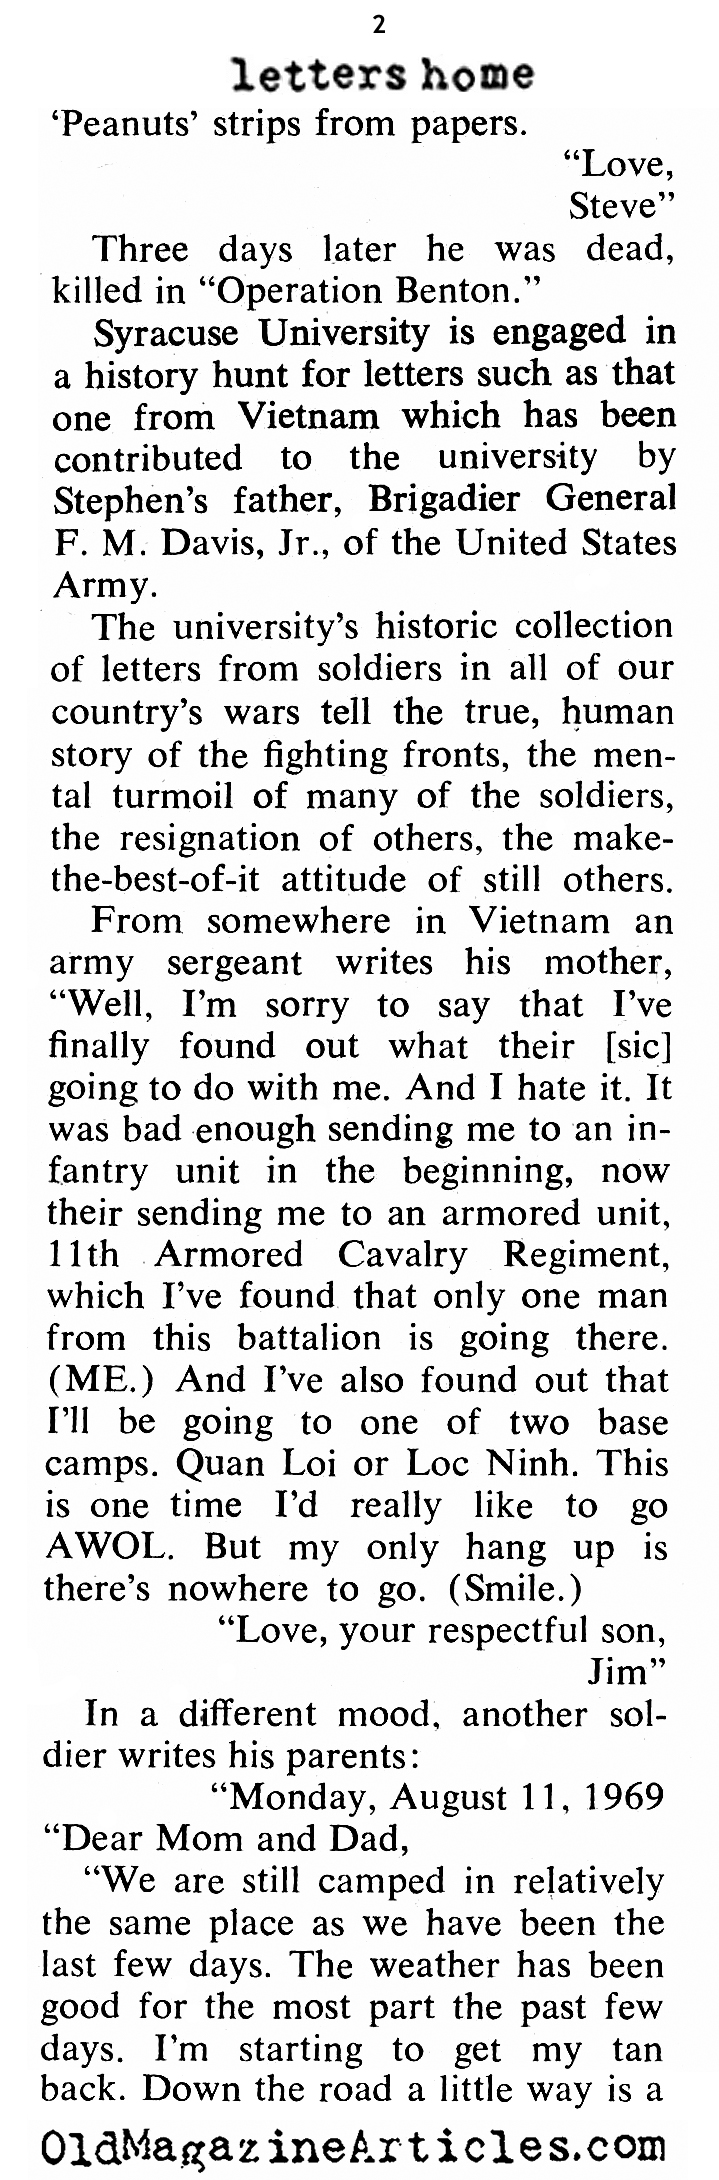 More Letters From Vietnam (Coronet Magazine, 1970)